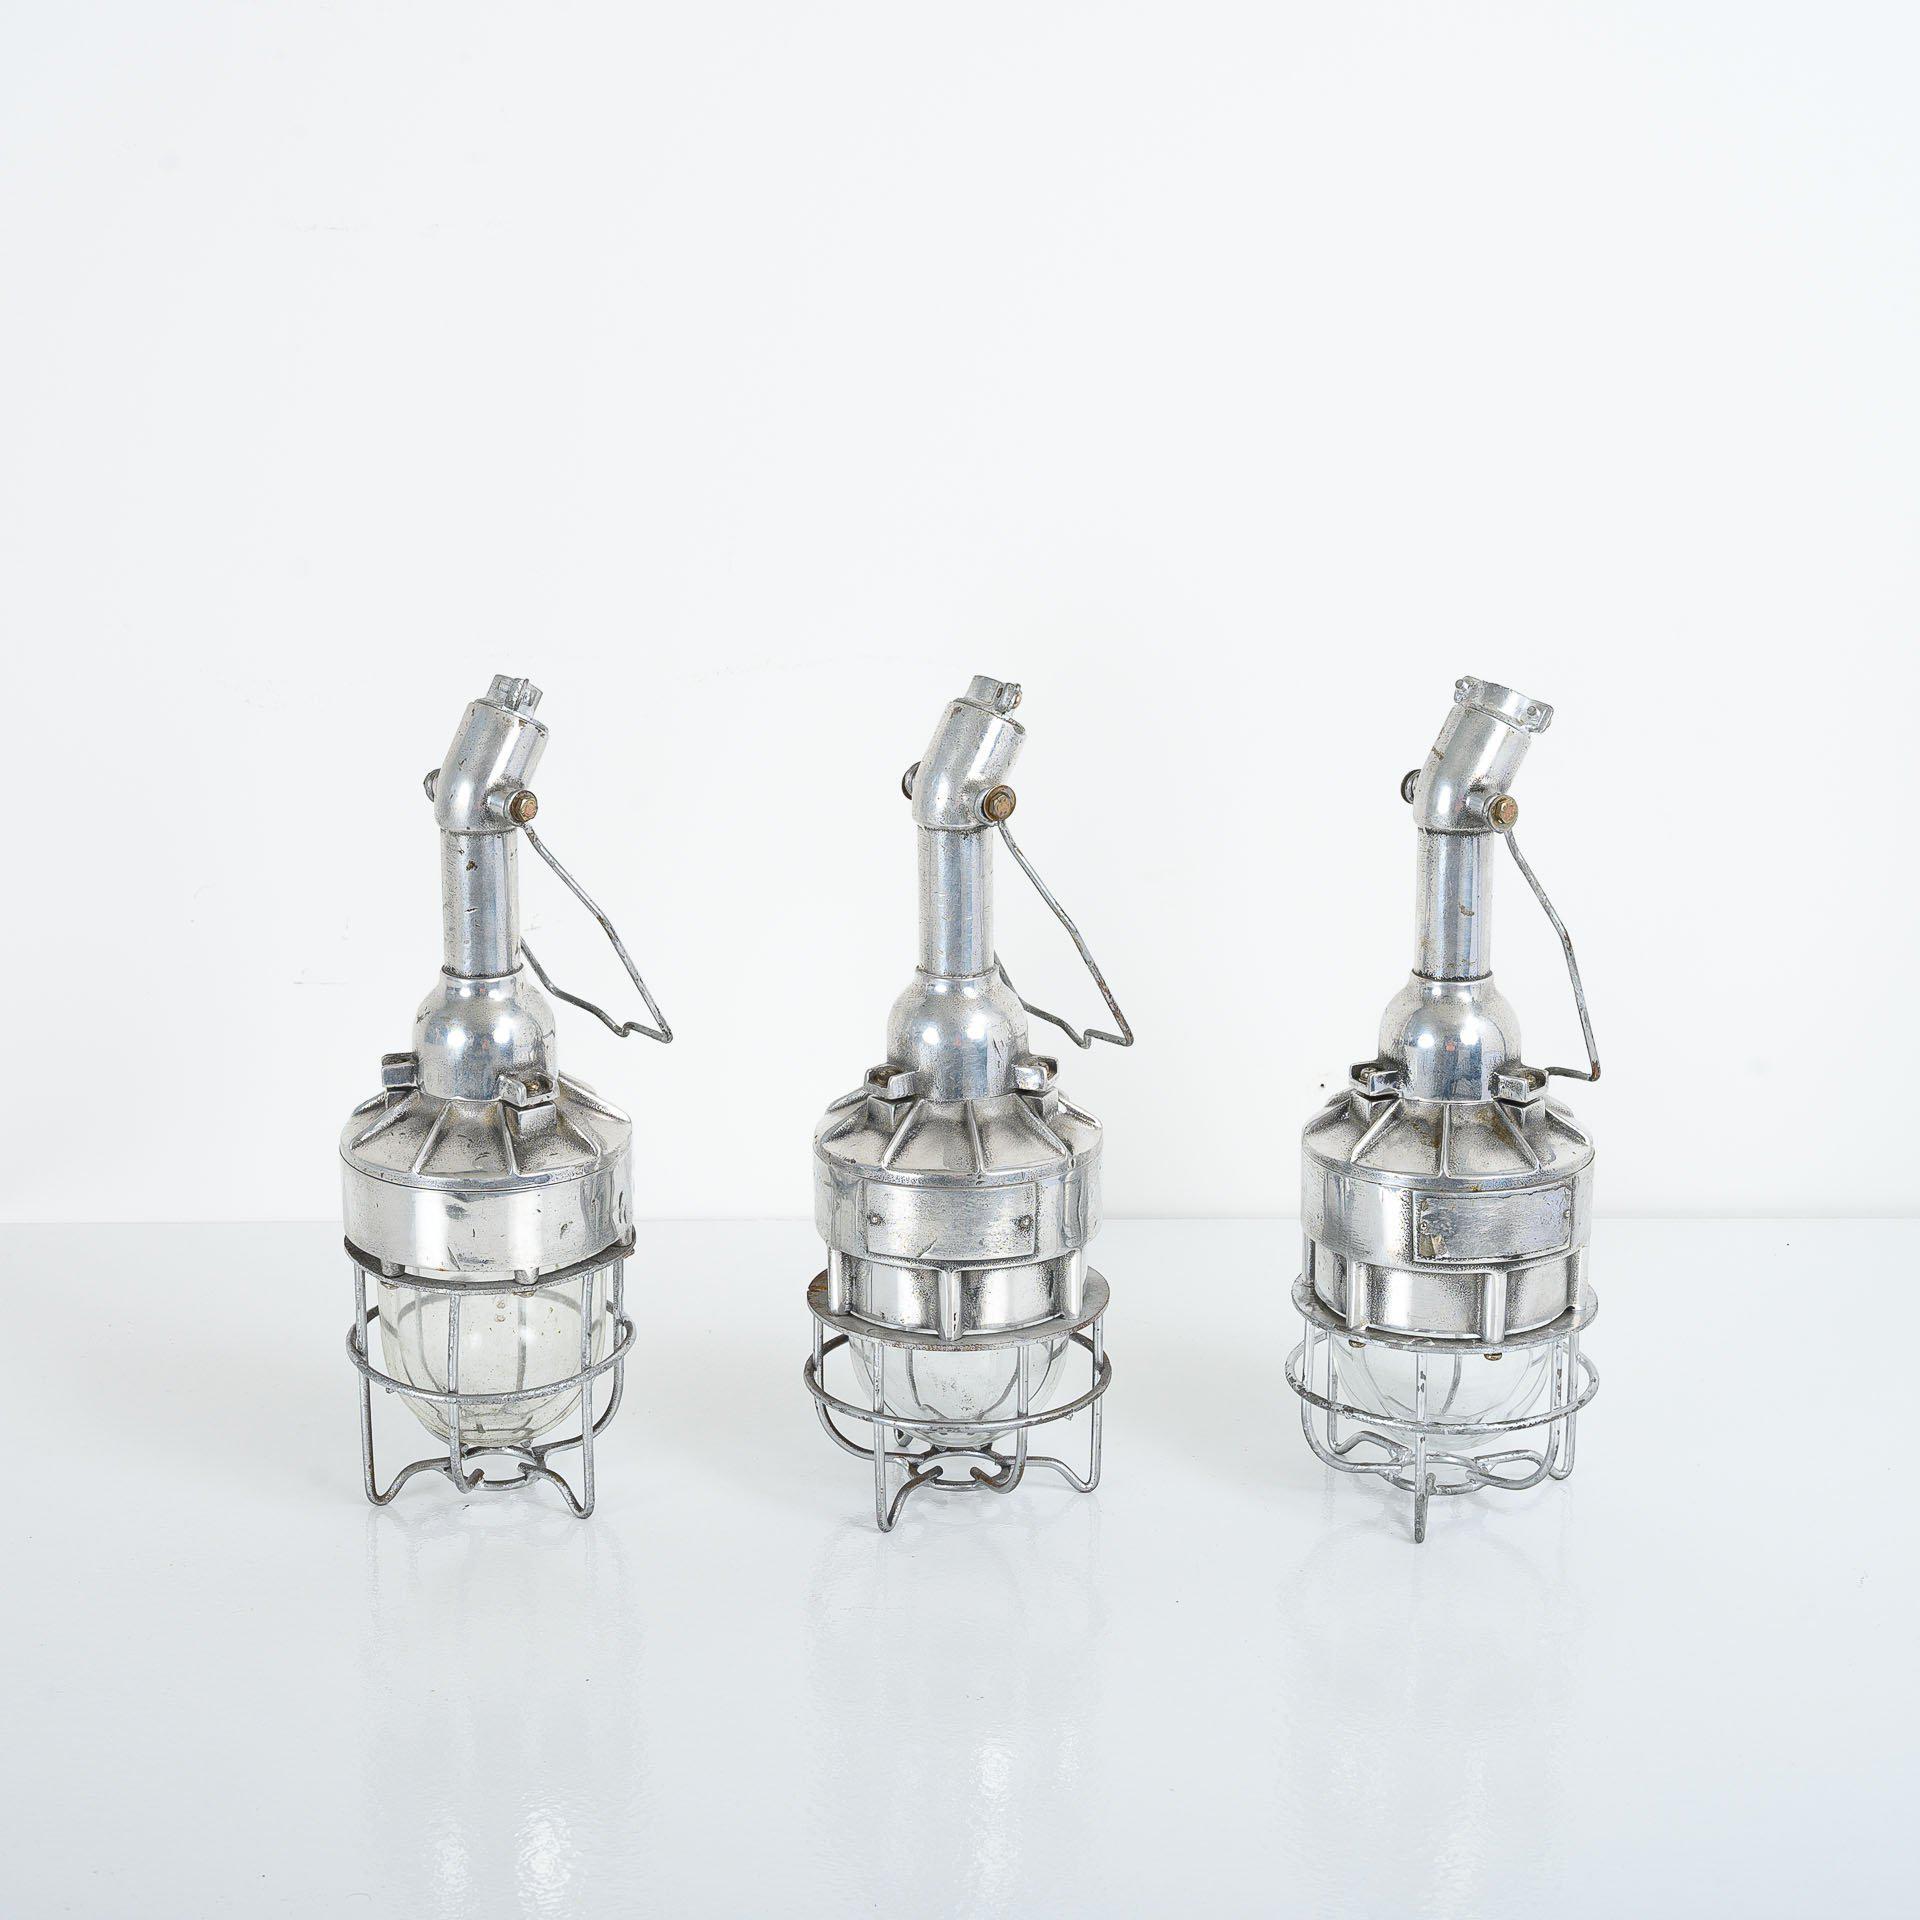 A stunning run of explosion proof task lamps.

Cast aluminium with heavy gauge glass enclosure protected with a cage design.

These fittings were designed as a mobile lamp for engineers to aid repair in extremely hazardous locations where naked